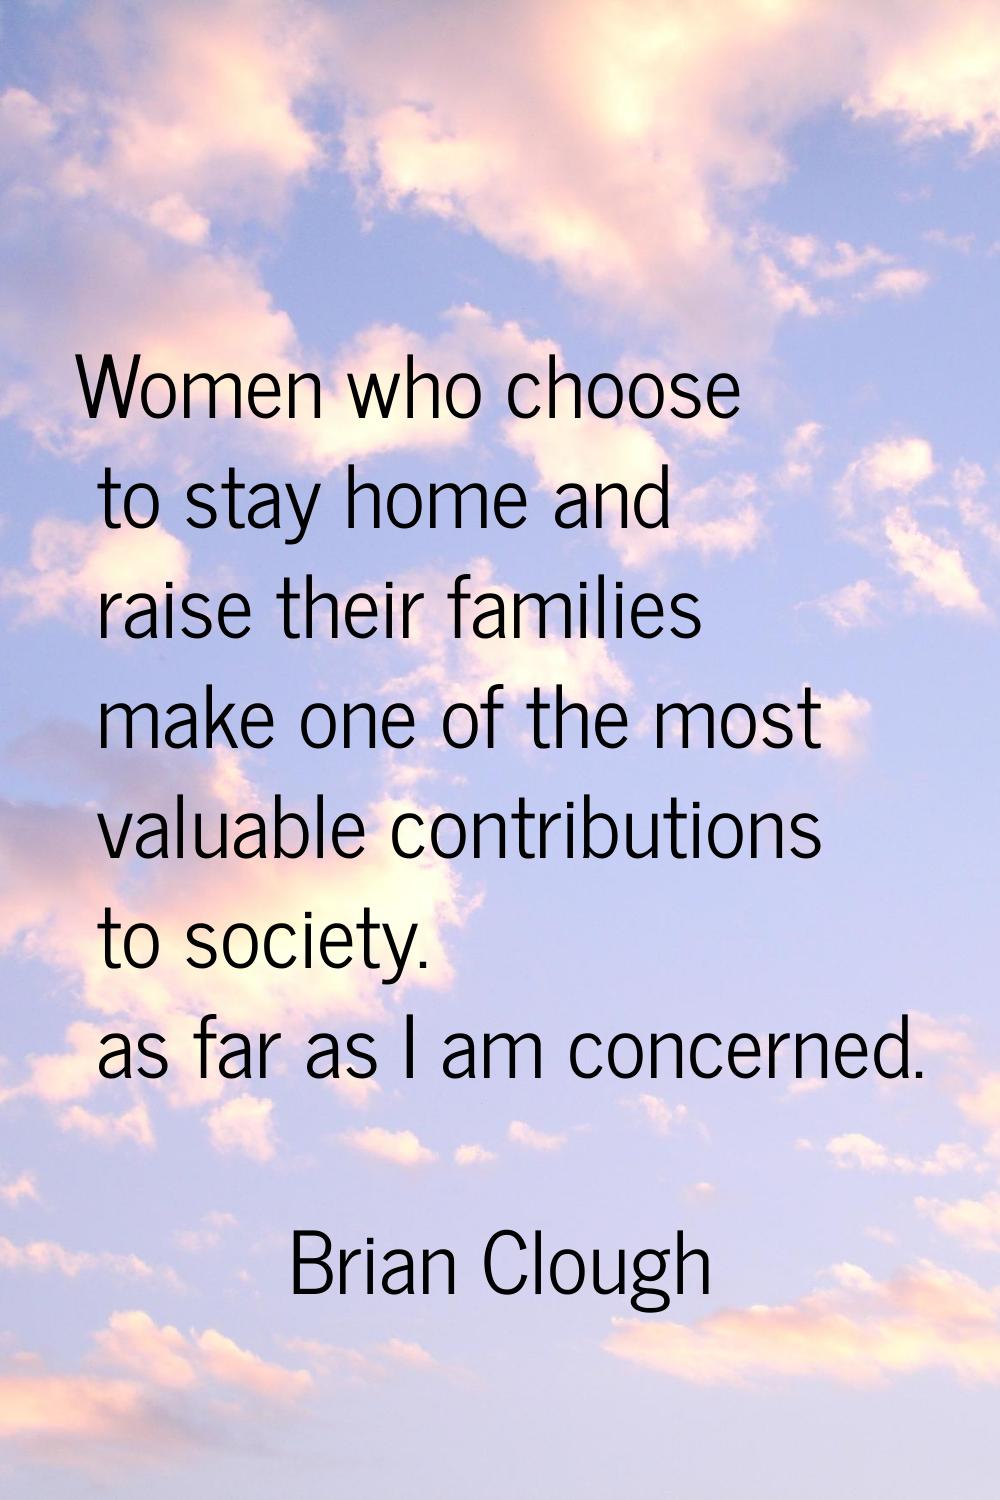 Women who choose to stay home and raise their families make one of the most valuable contributions 